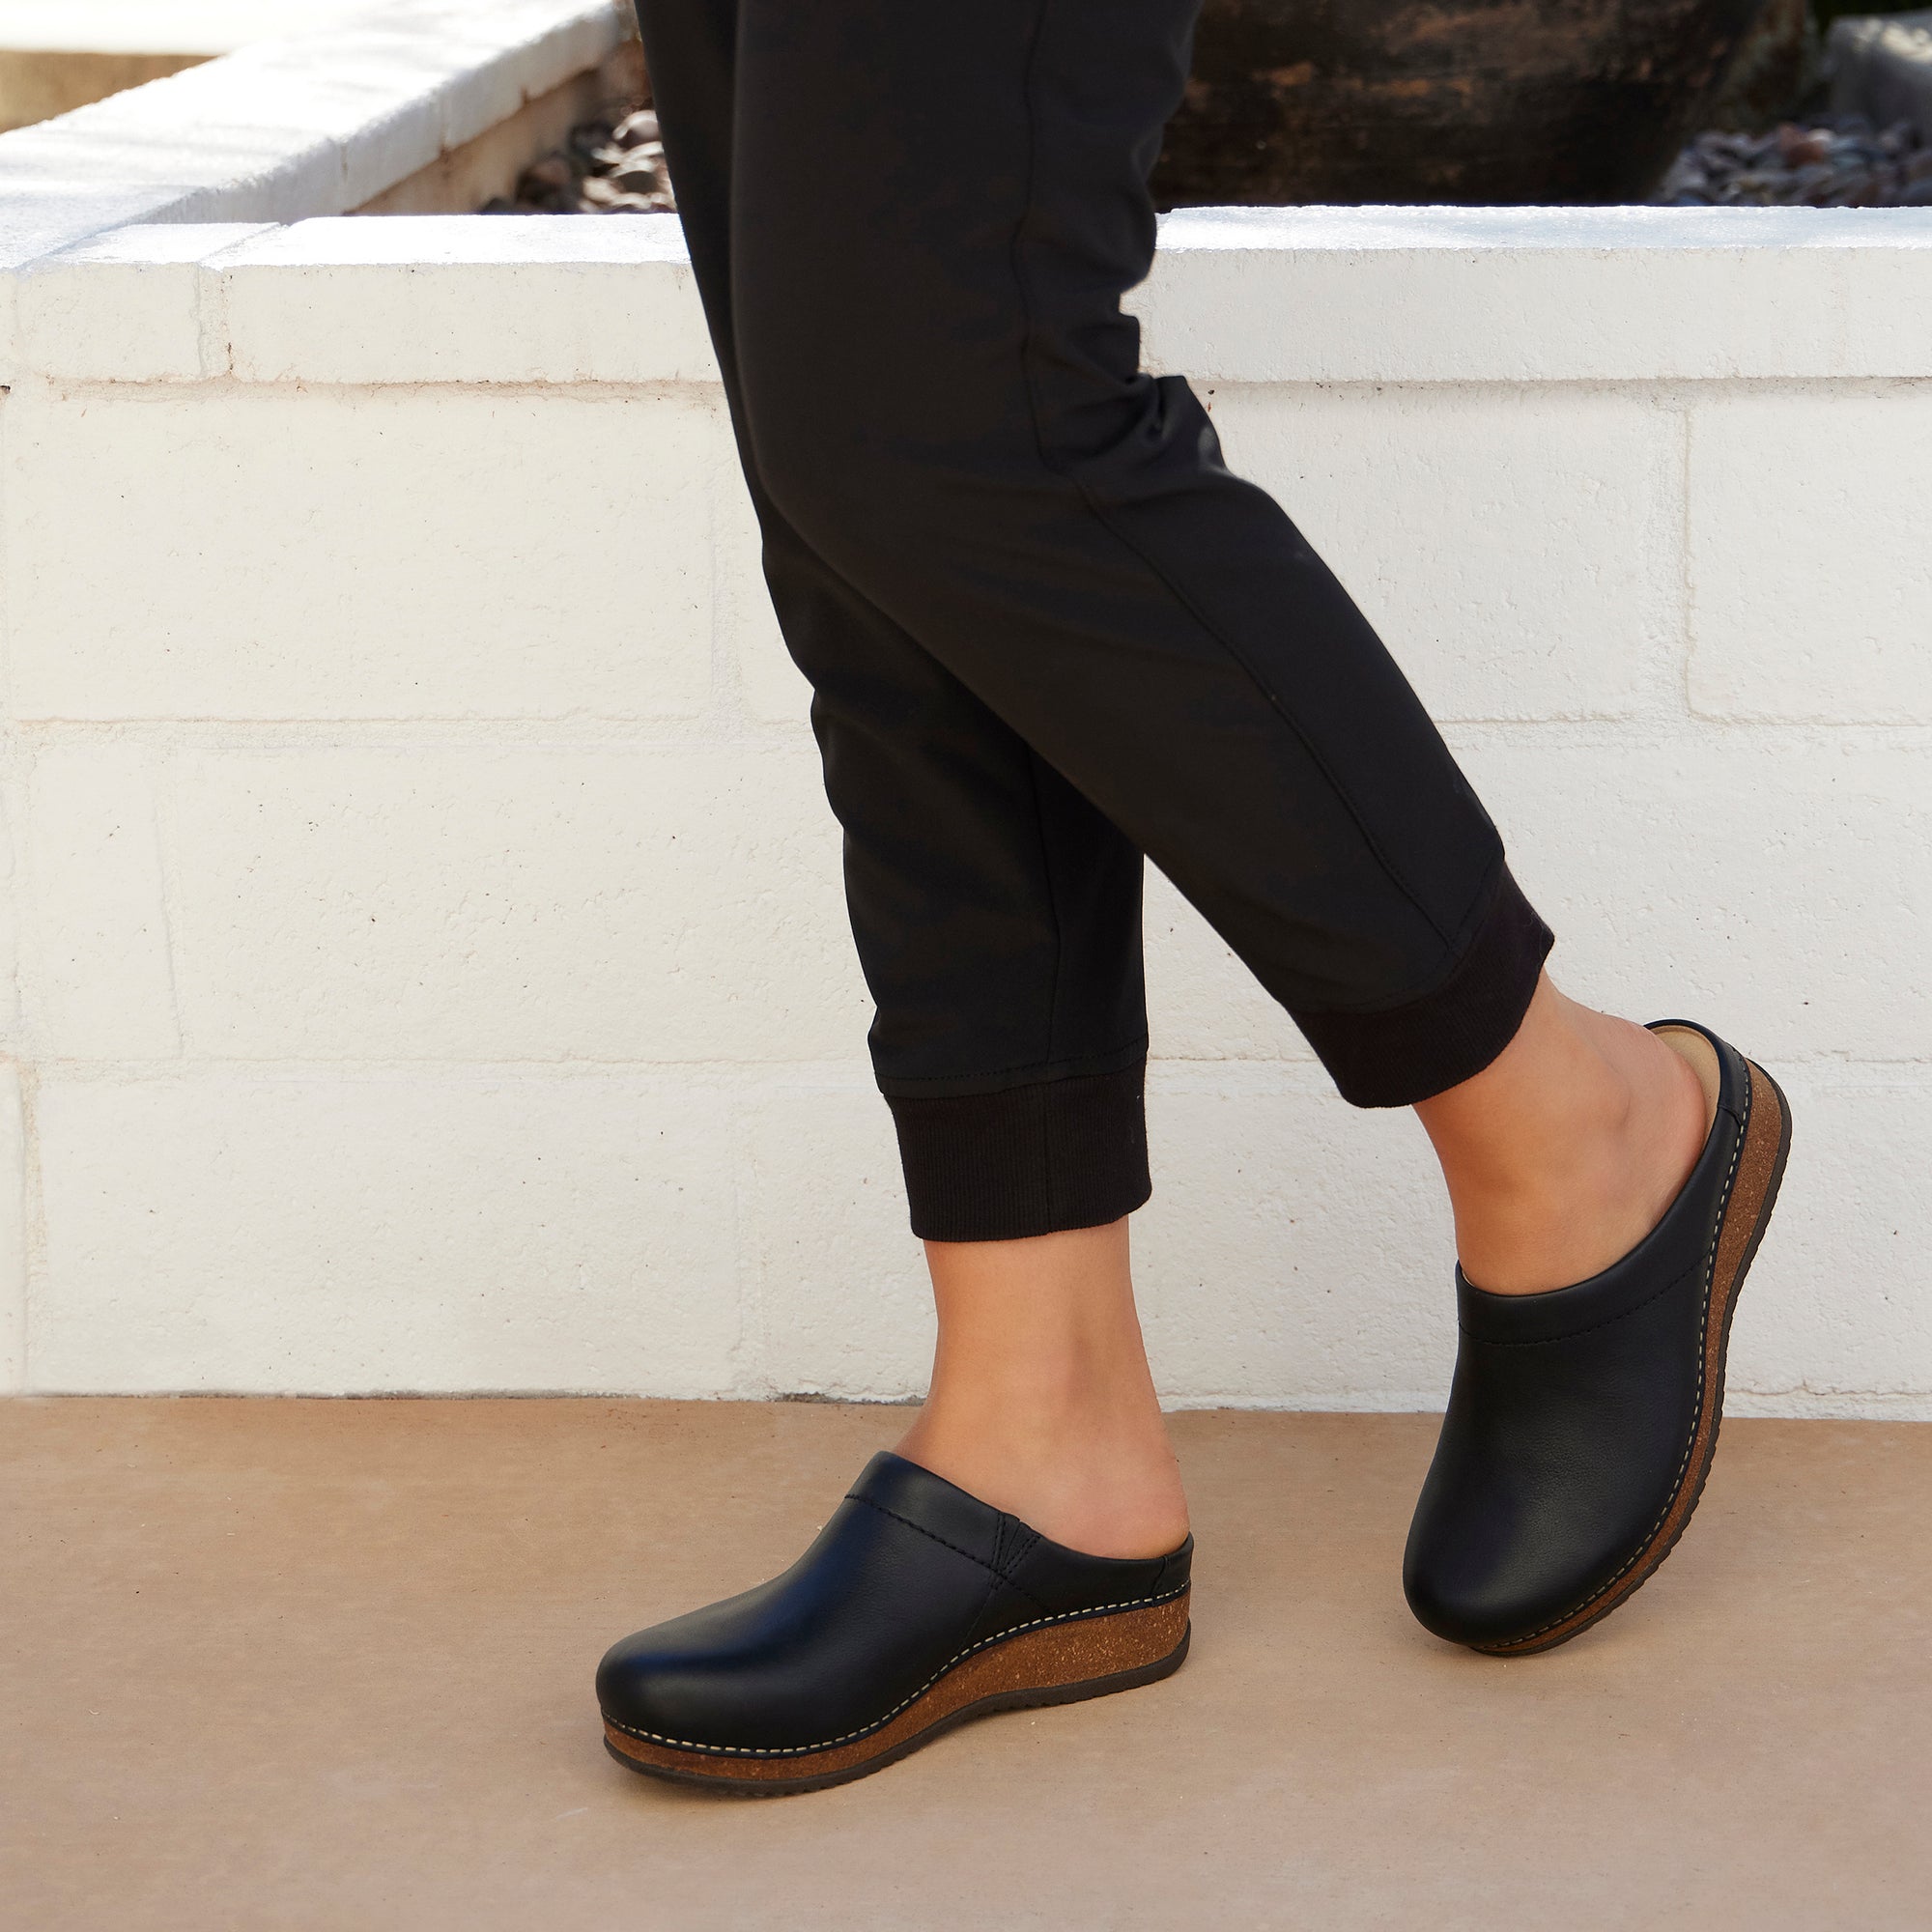 A black mule clog with a cork-based outsole.